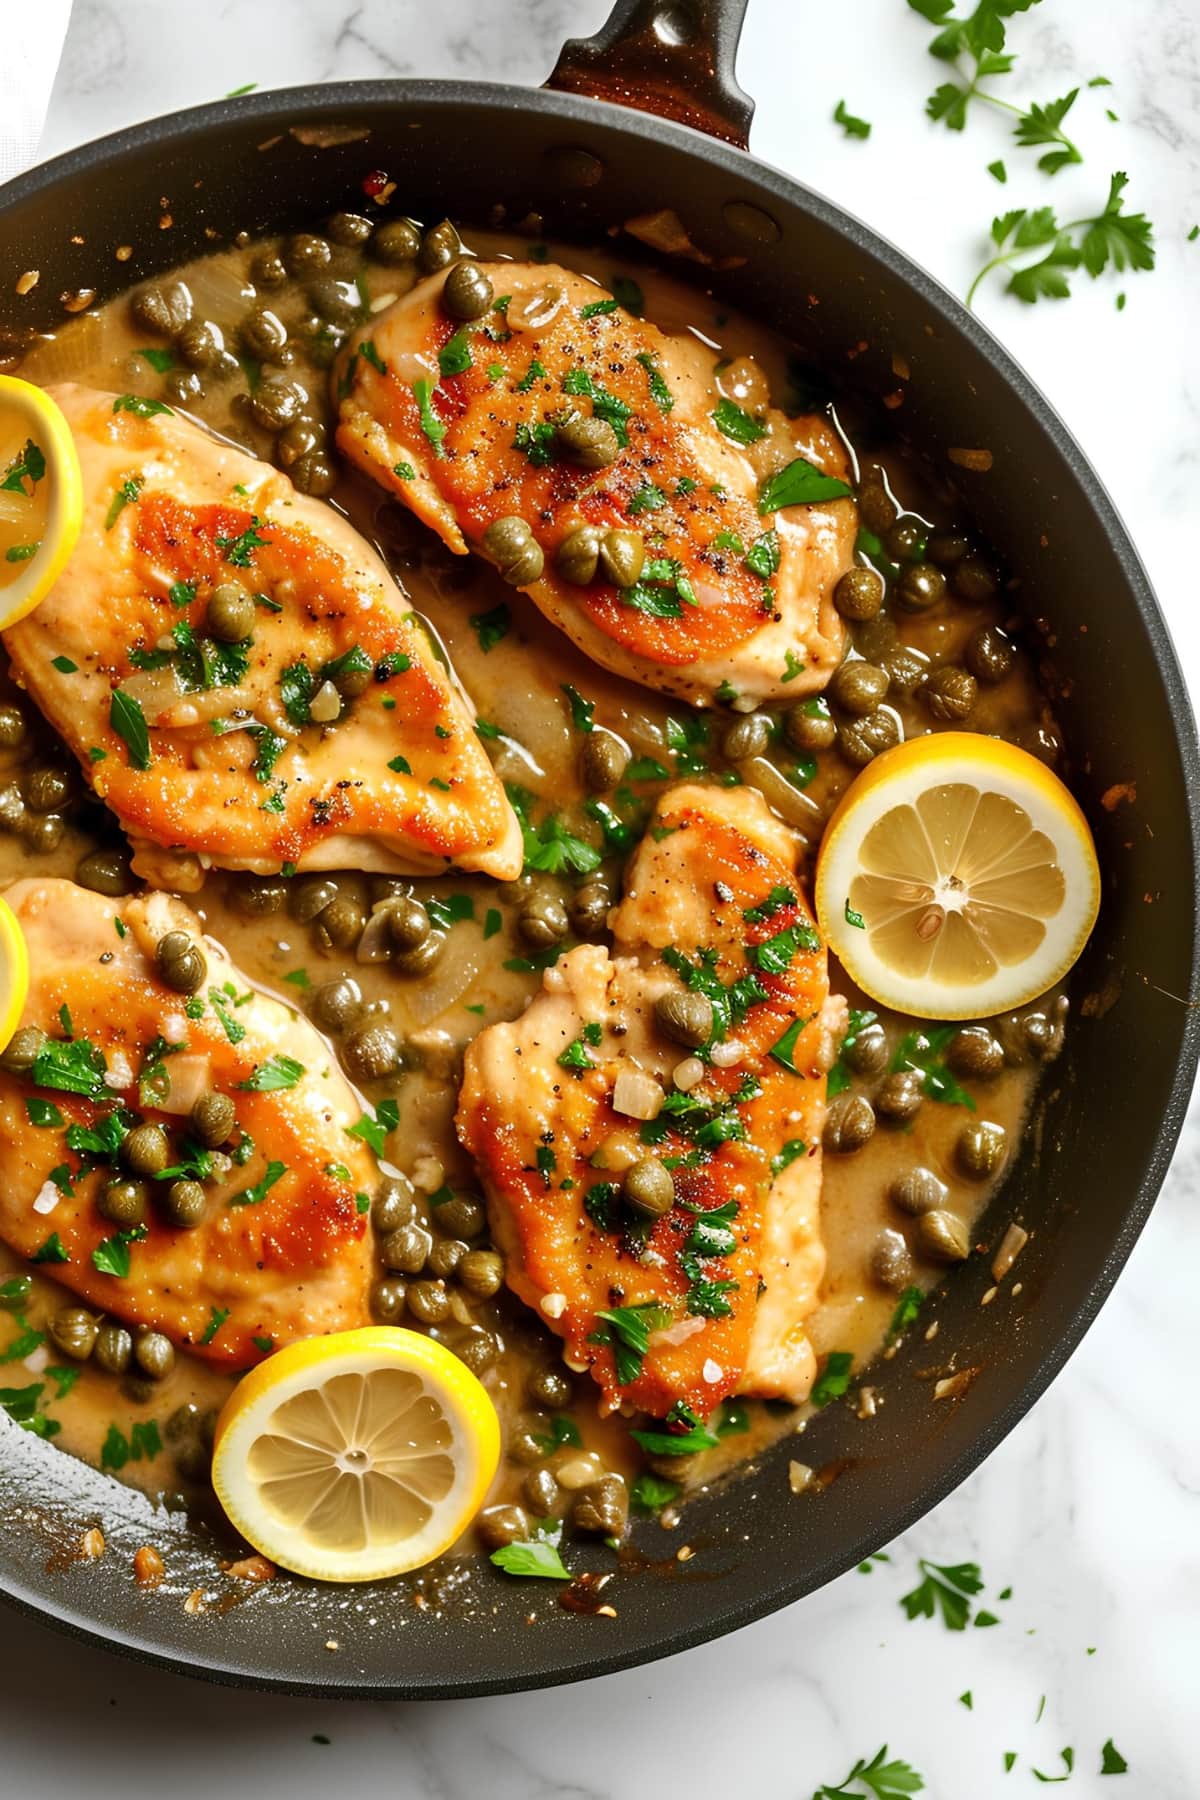 Homemade Chicken Piccata in a Black Skillet with Lemon and Capers, Top View